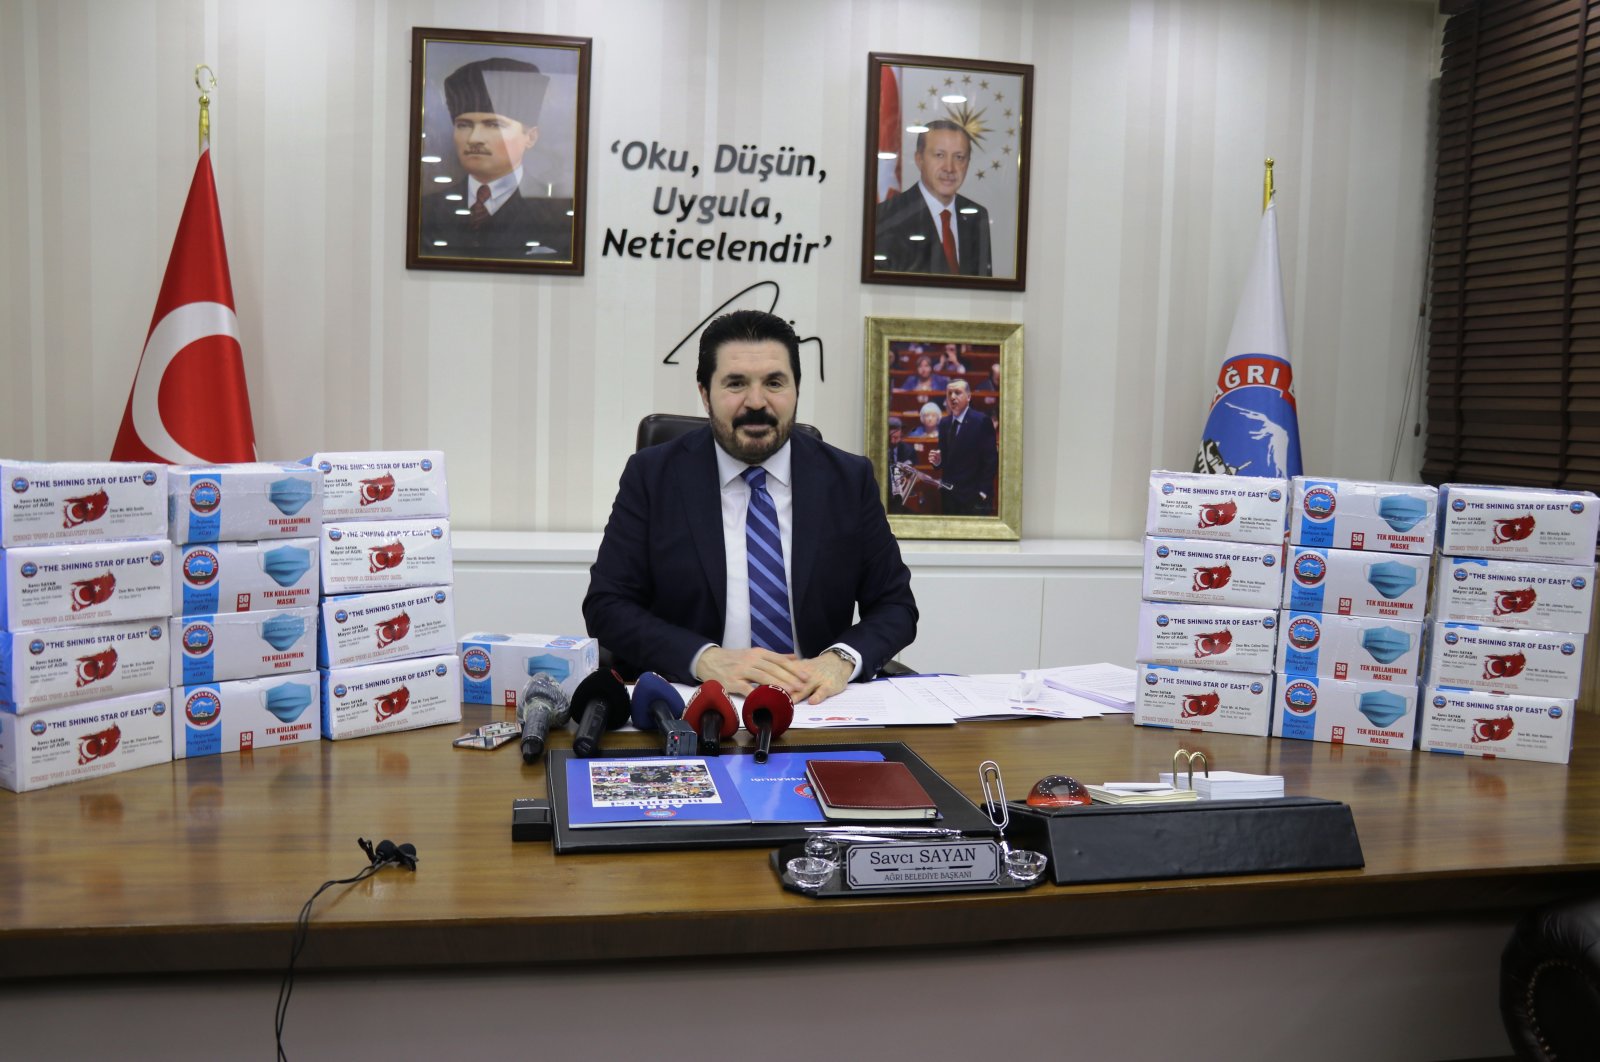 Ağrı Mayor Savcı Sayan poses with the boxes of masks to be sent to U.S., in northeastern Ağrı province, Turkey, April 28, 2020. (AA Photo)